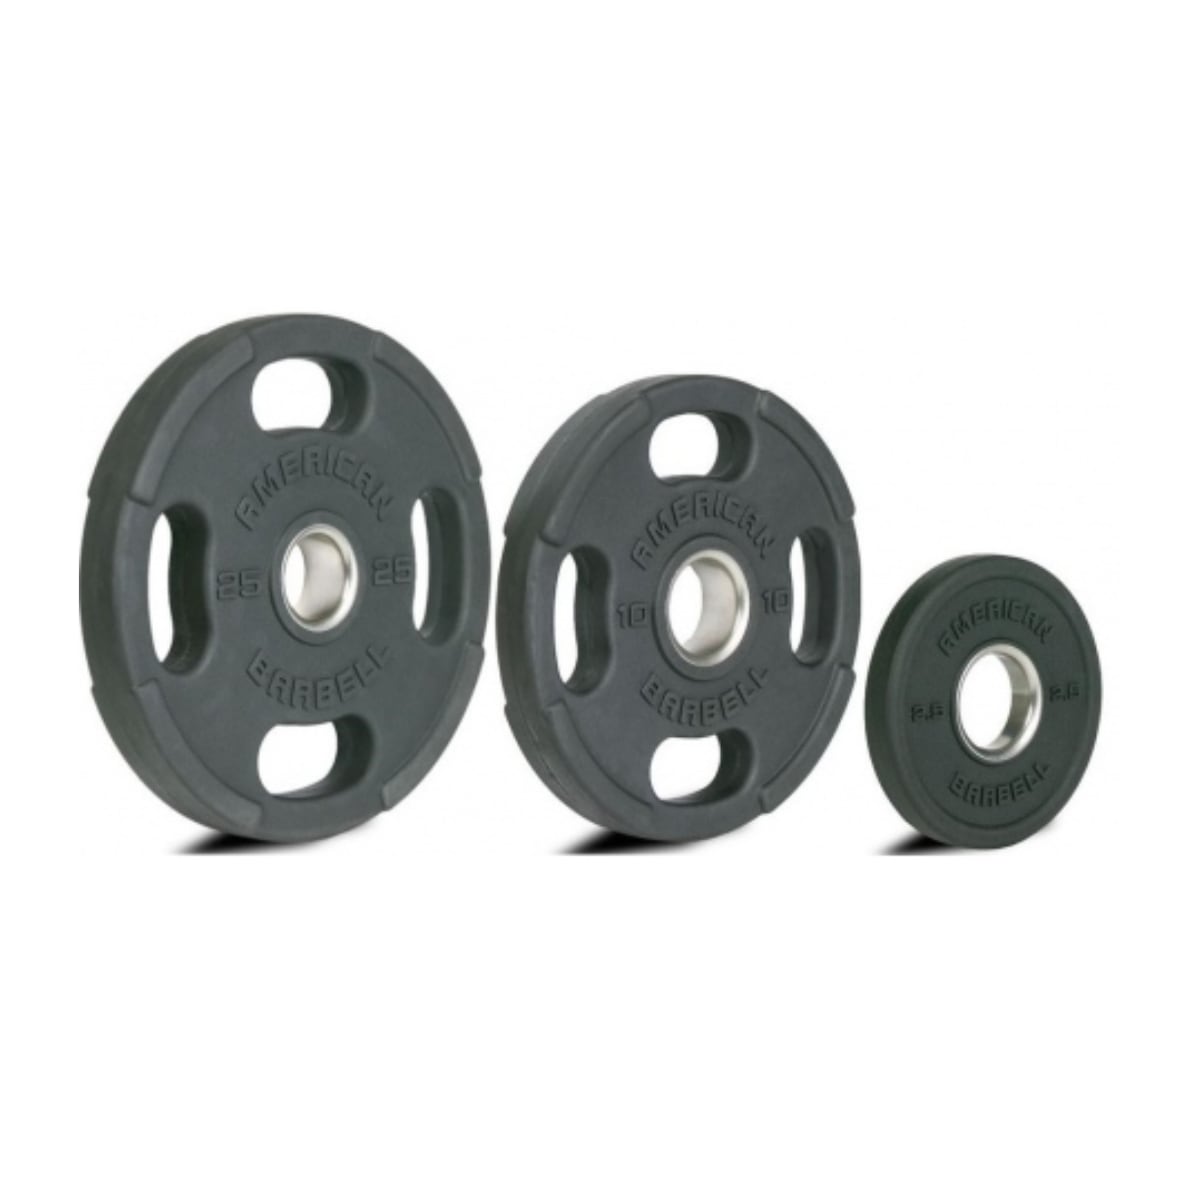 American Barbell Olympic Rubber Plate 25 kg